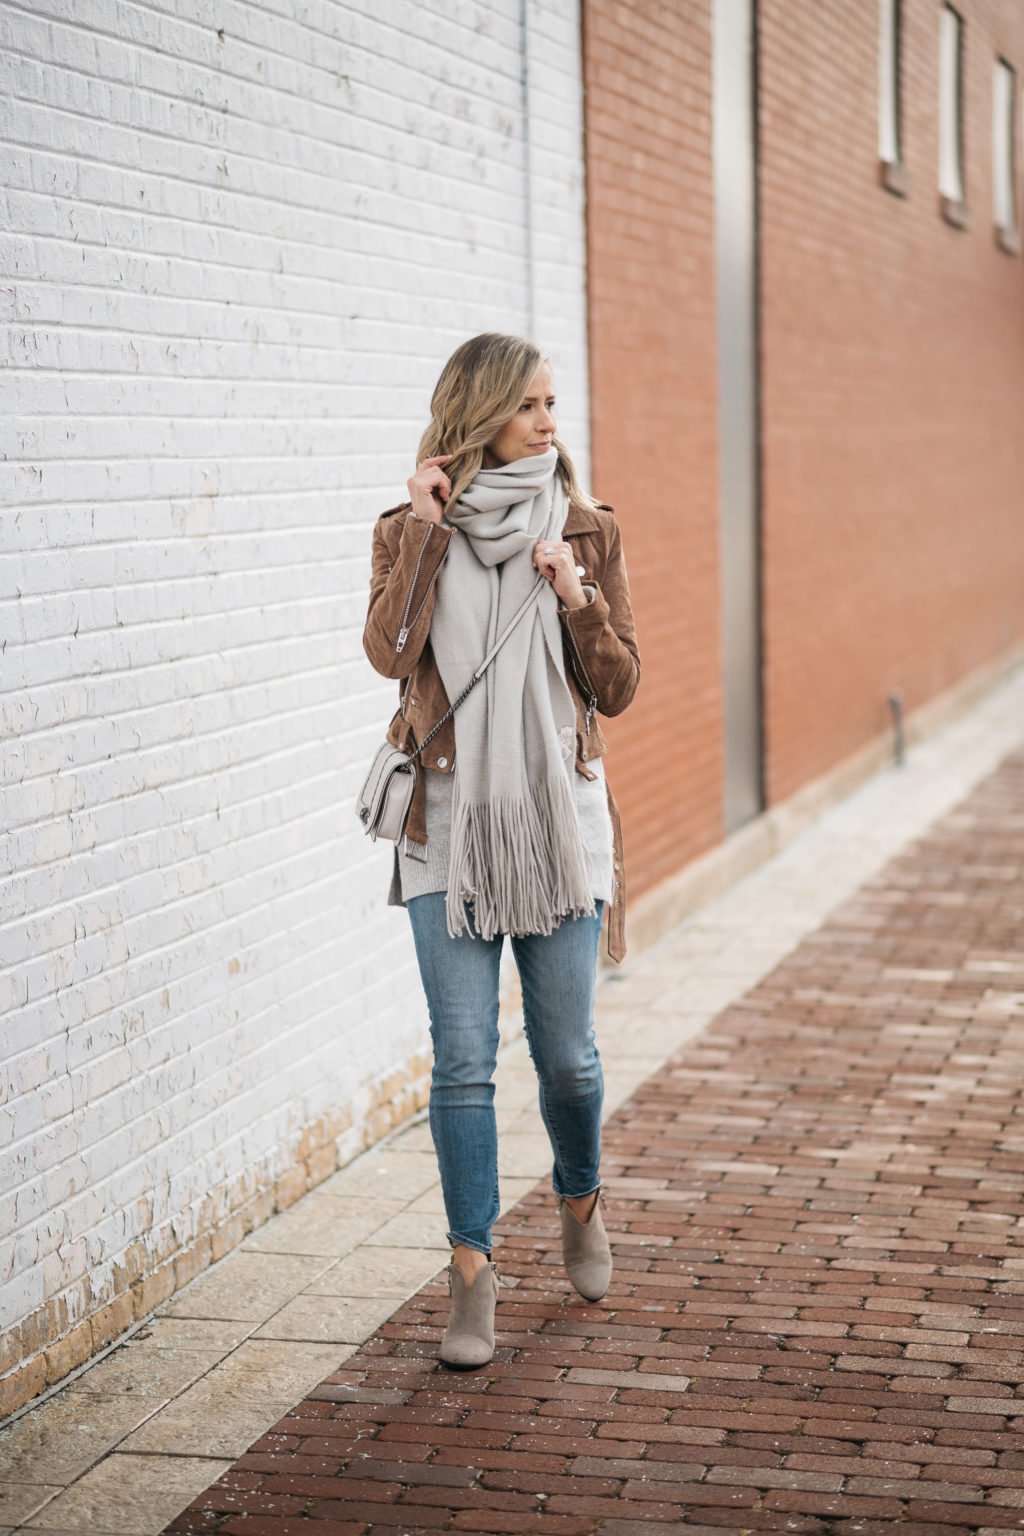 Winter outfit ideas